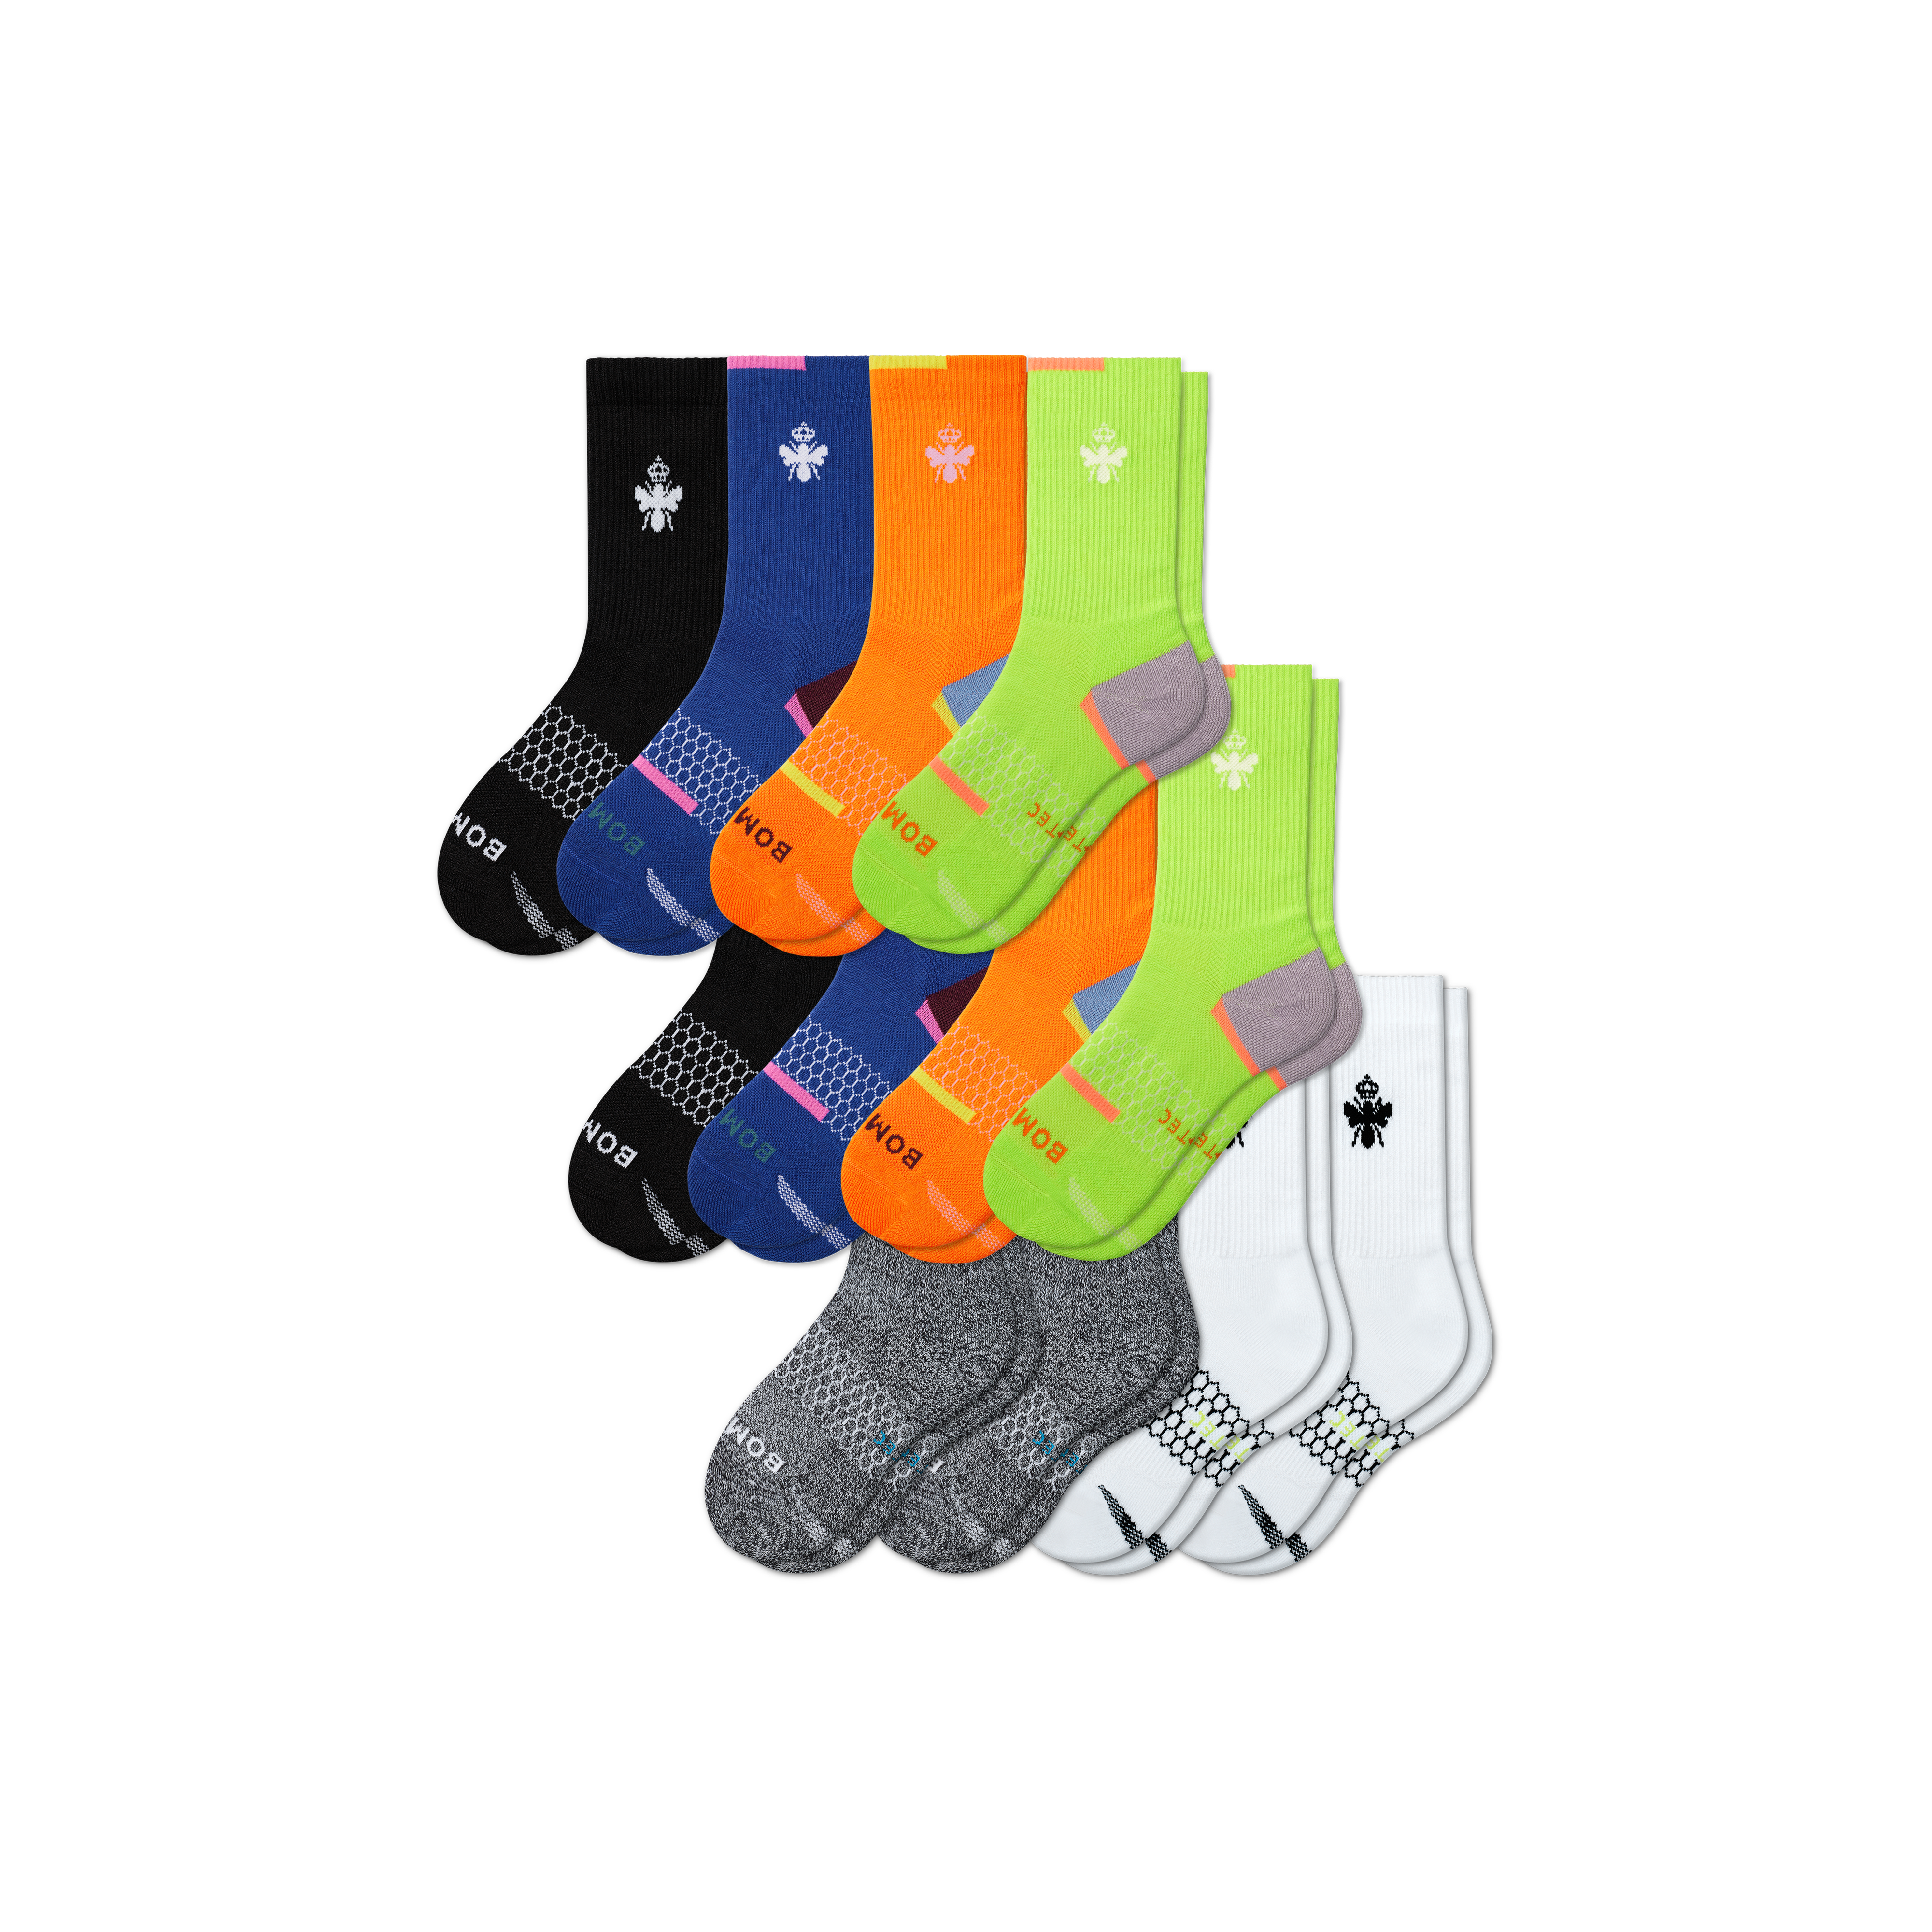 Bombas Youth All-Purpose Performance Calf Sock 12-Pack Leading Offer -  Bombas is a comfort focused sock and apparel brand with a mission to help  those in need. One purchased = one donated